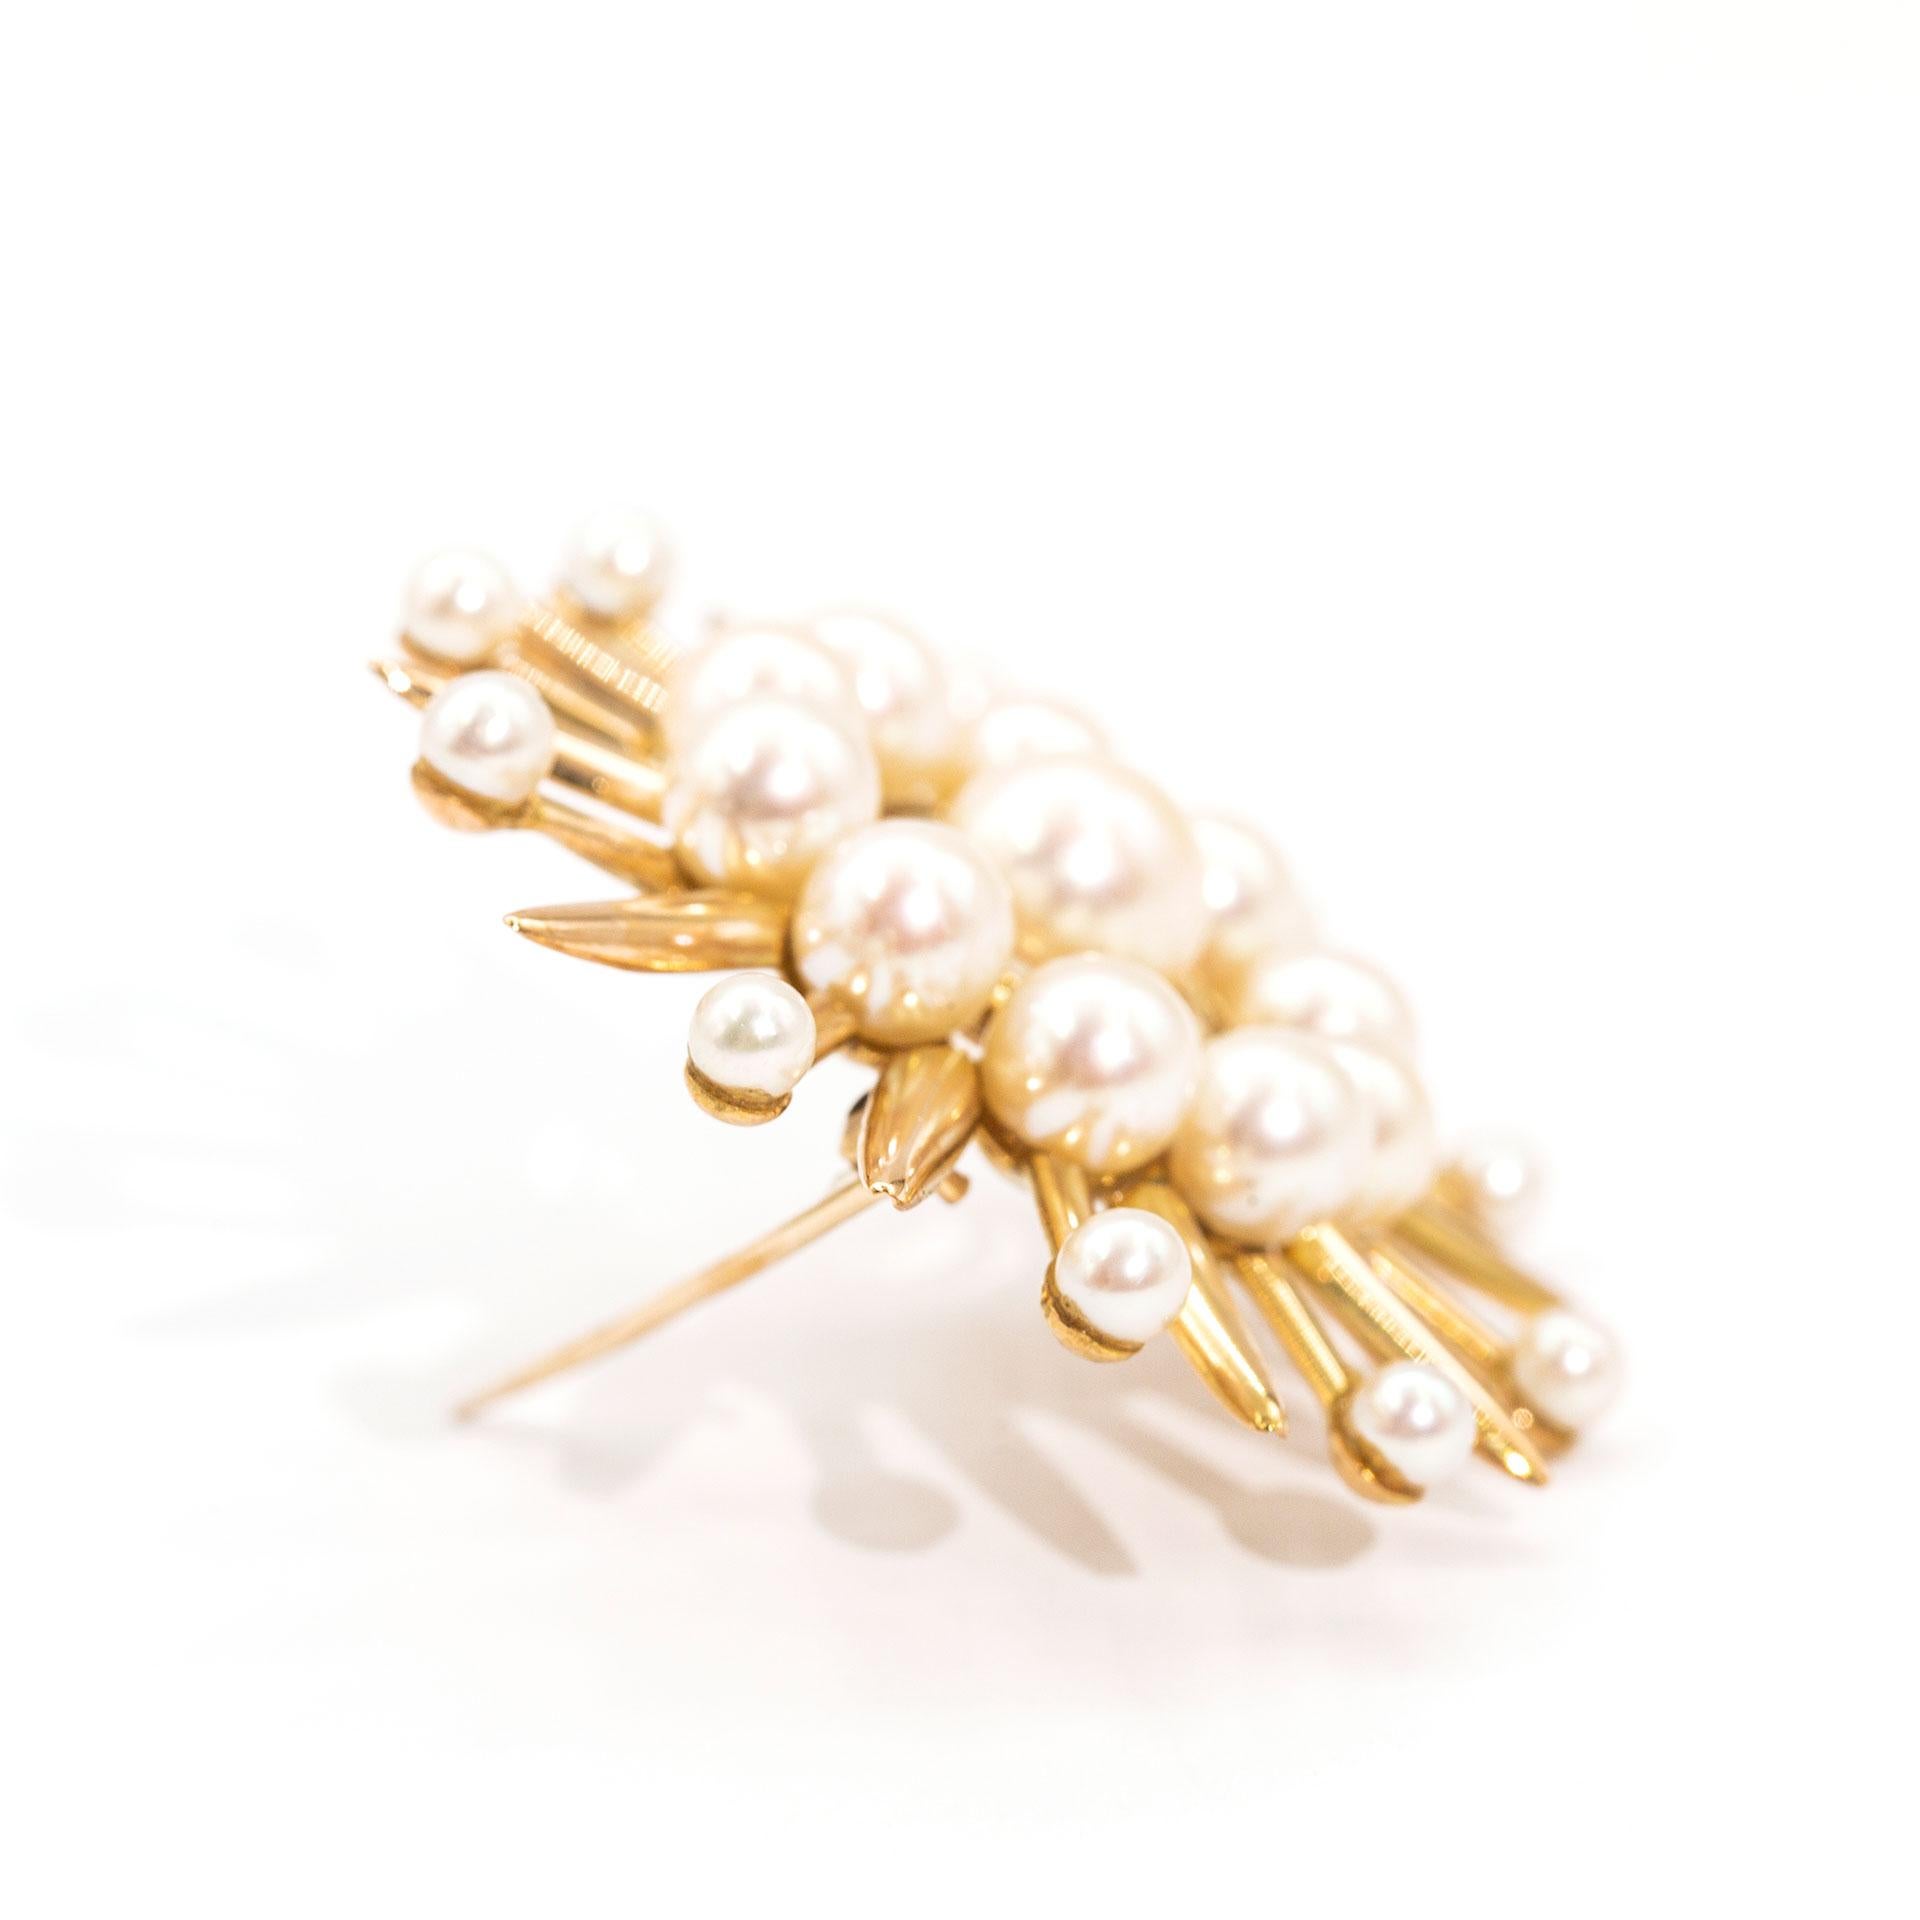 Modern 18 Carat Yellow Gold Cultured Pearl Vintage Brooch, circa 1900s